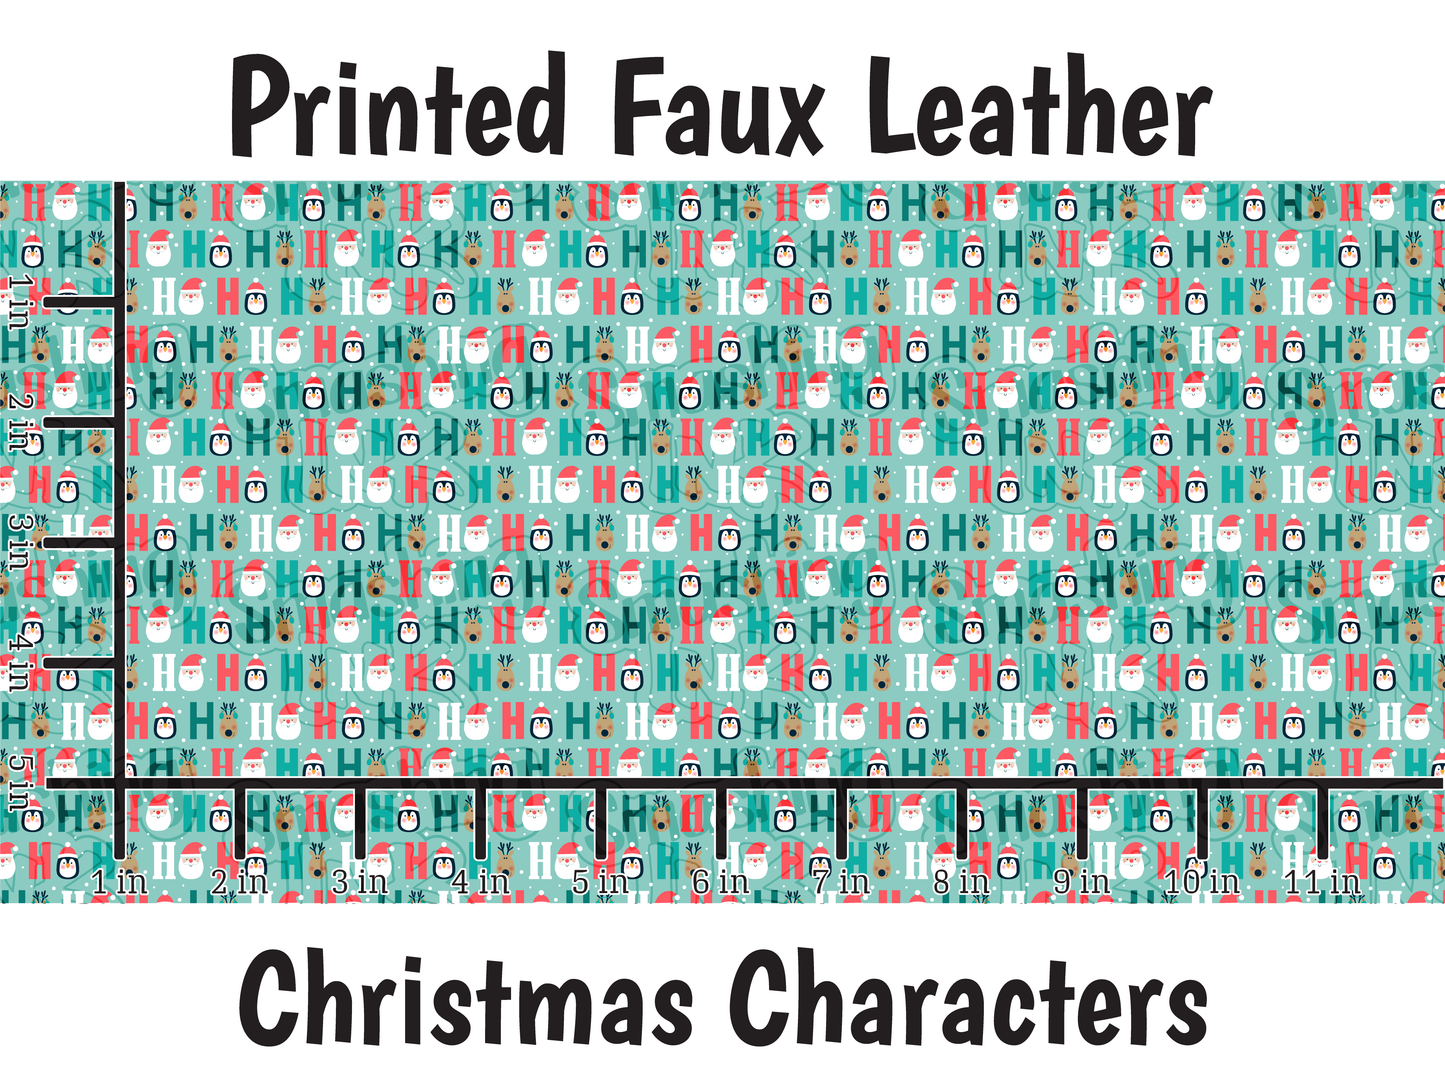 Christmas Characters - Faux Leather Sheet (SHIPS IN 3 BUS DAYS)